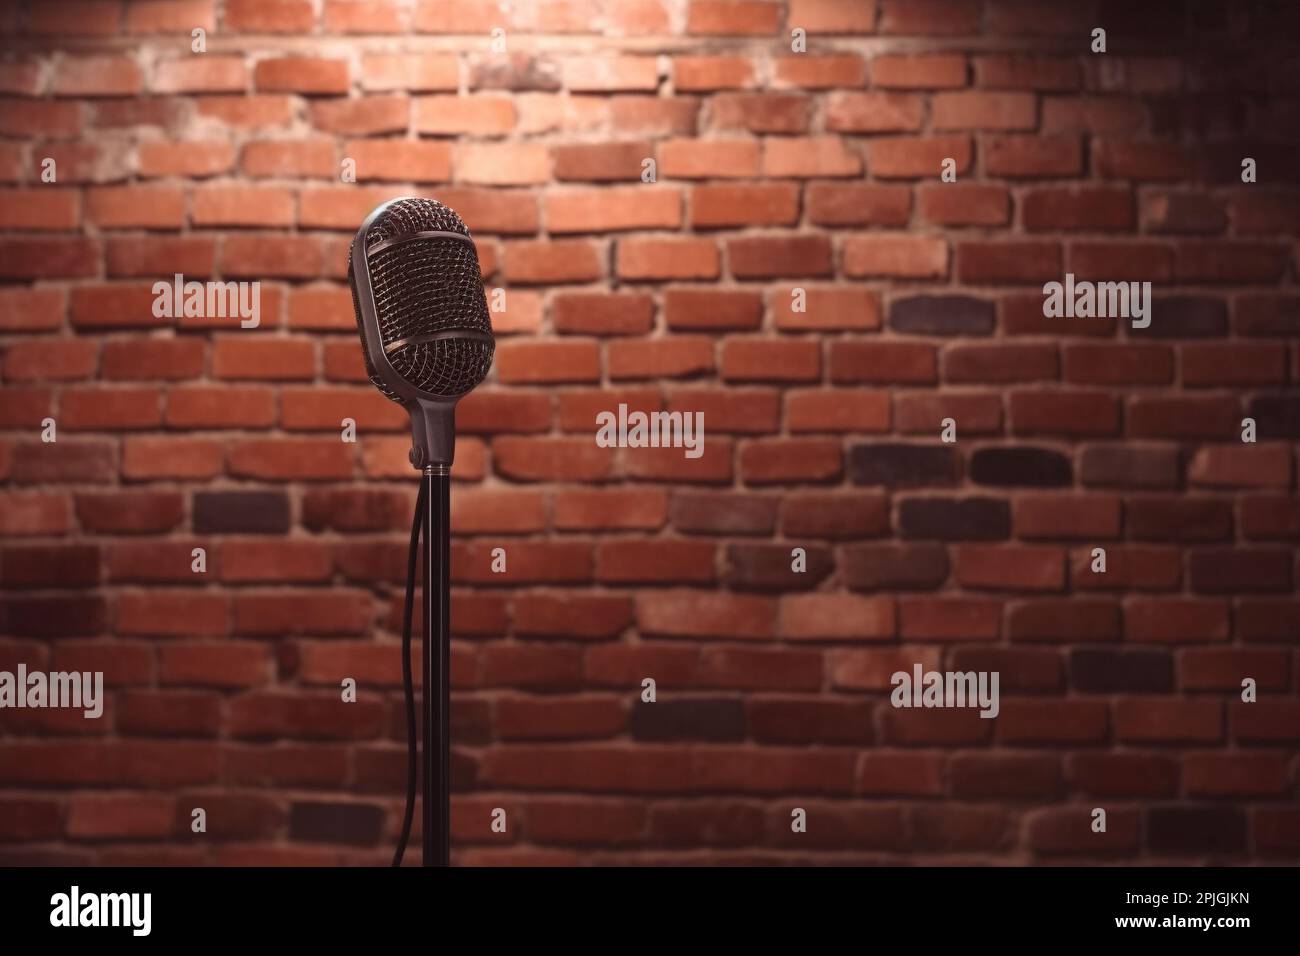 Stand up comedy stage microphone background brick wall. Stock Photo